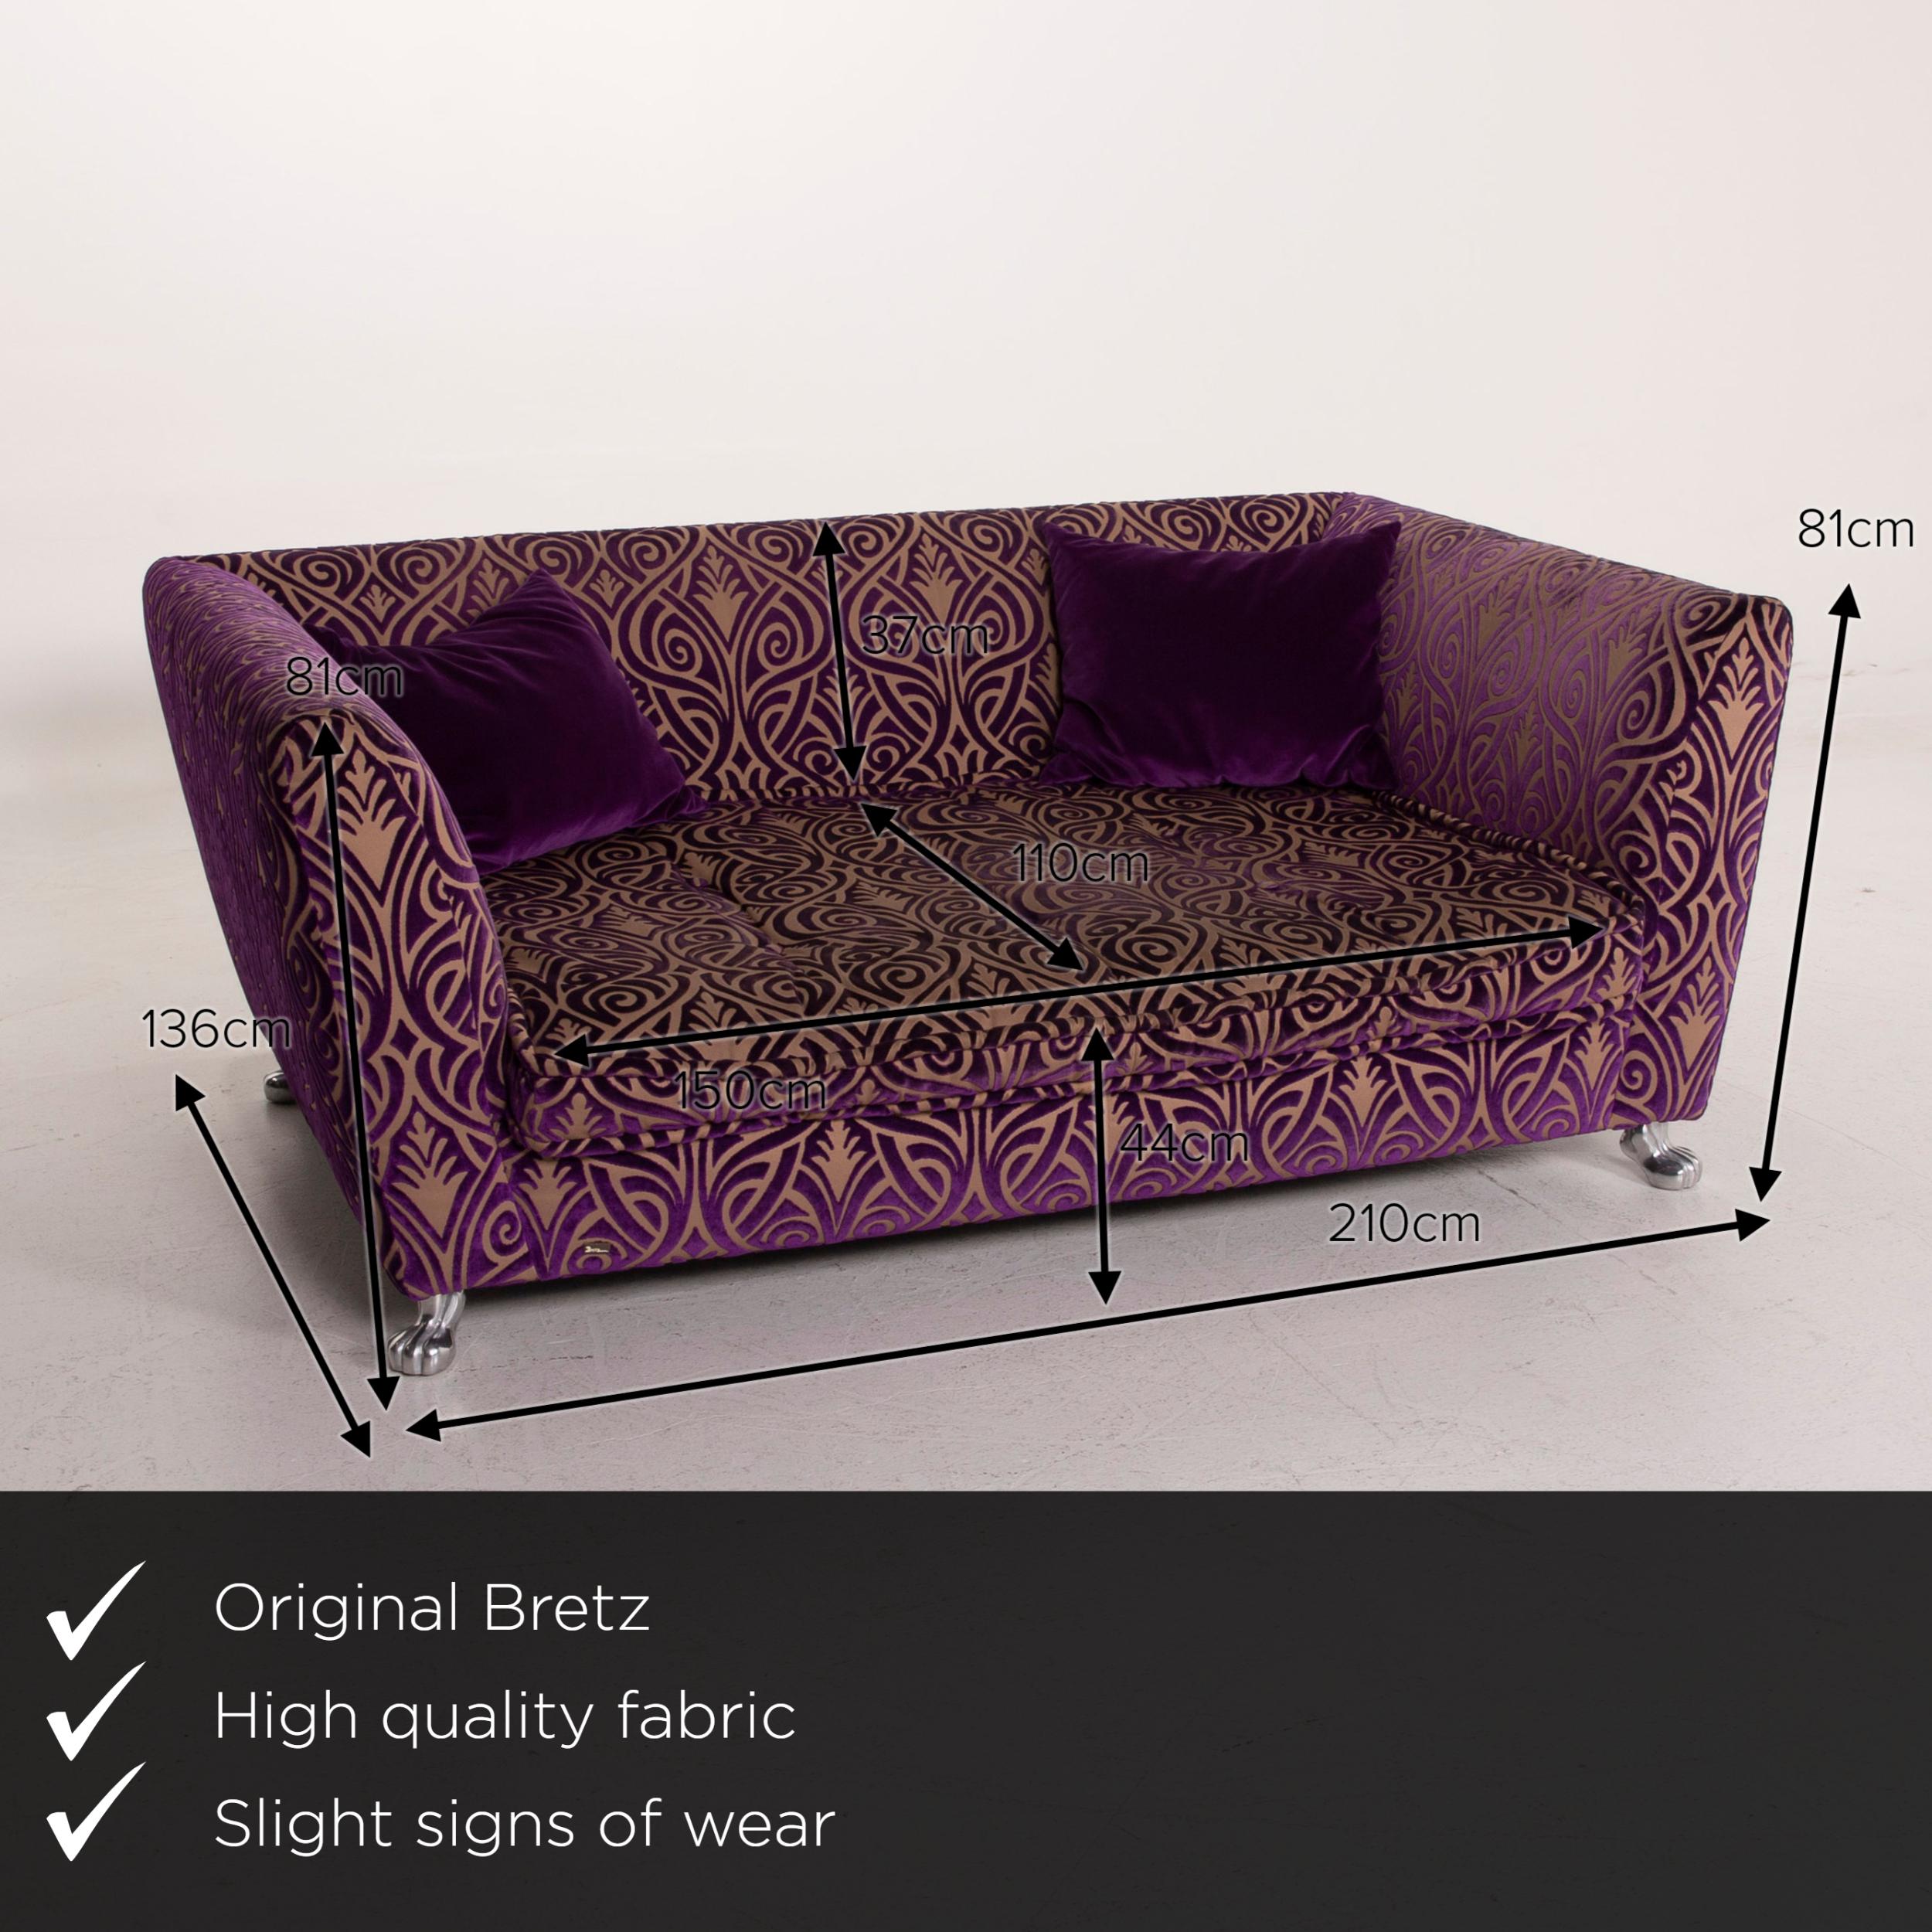 We present to you a Bretz Monster Fabric sofa purple three-seat.
 

 Product measurements in centimeters:
 

Depth 136
Width 201
Height 81
Seat height 44
Rest height 81
Seat depth 110
Seat width 150
Back height 37.

 